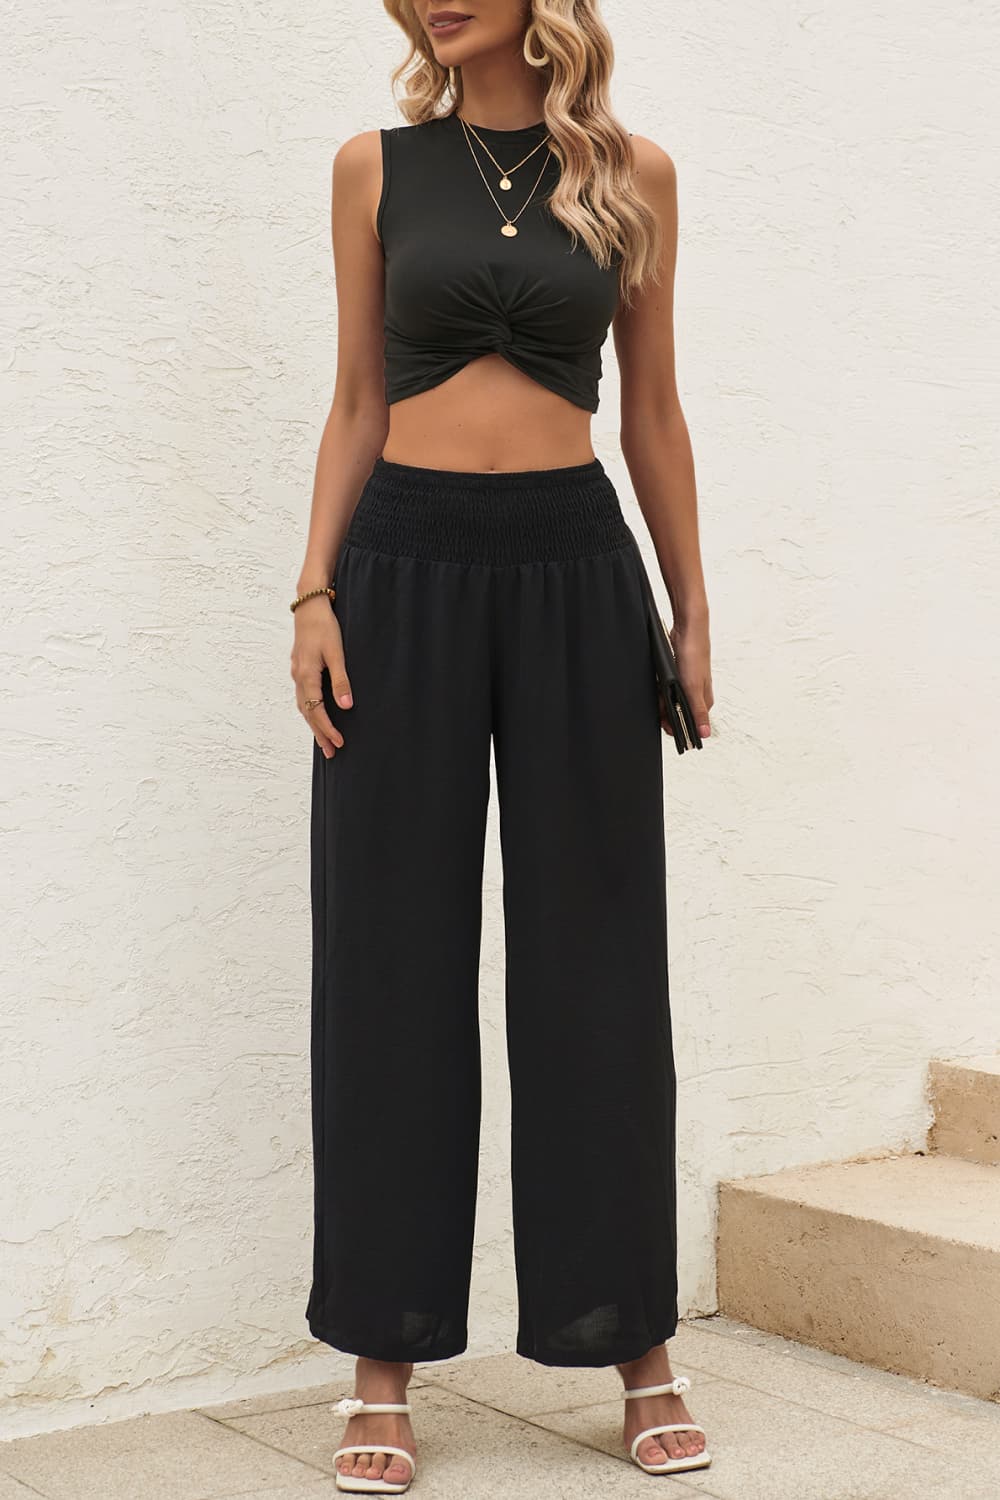 Twist Front Cropped Tank and Pants Set - nailedmoms